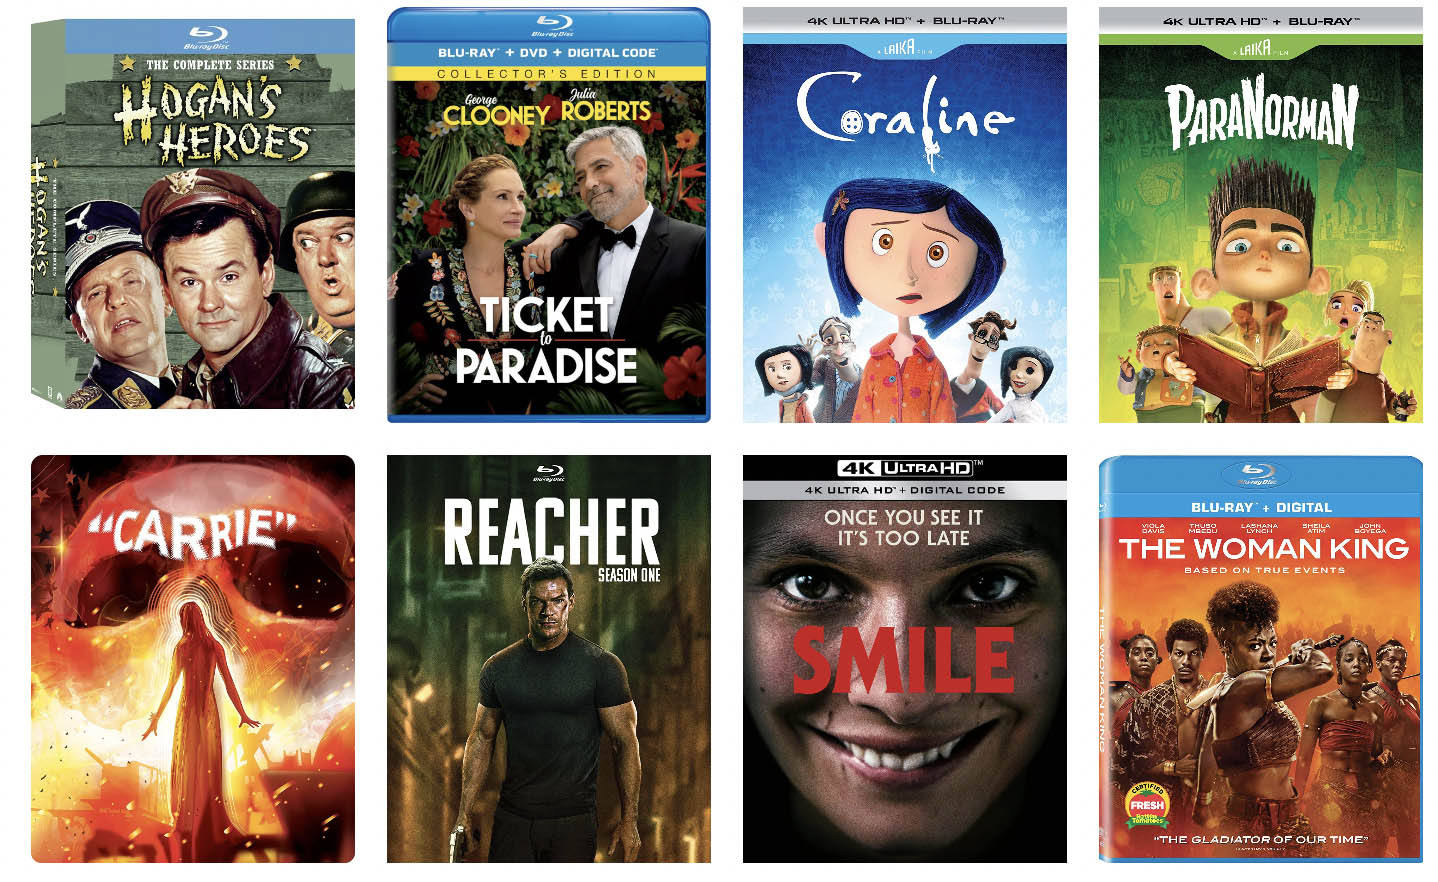 New 4k/Bluray Releases Smile, Coraline, ParaNorman, Reacher S1, The